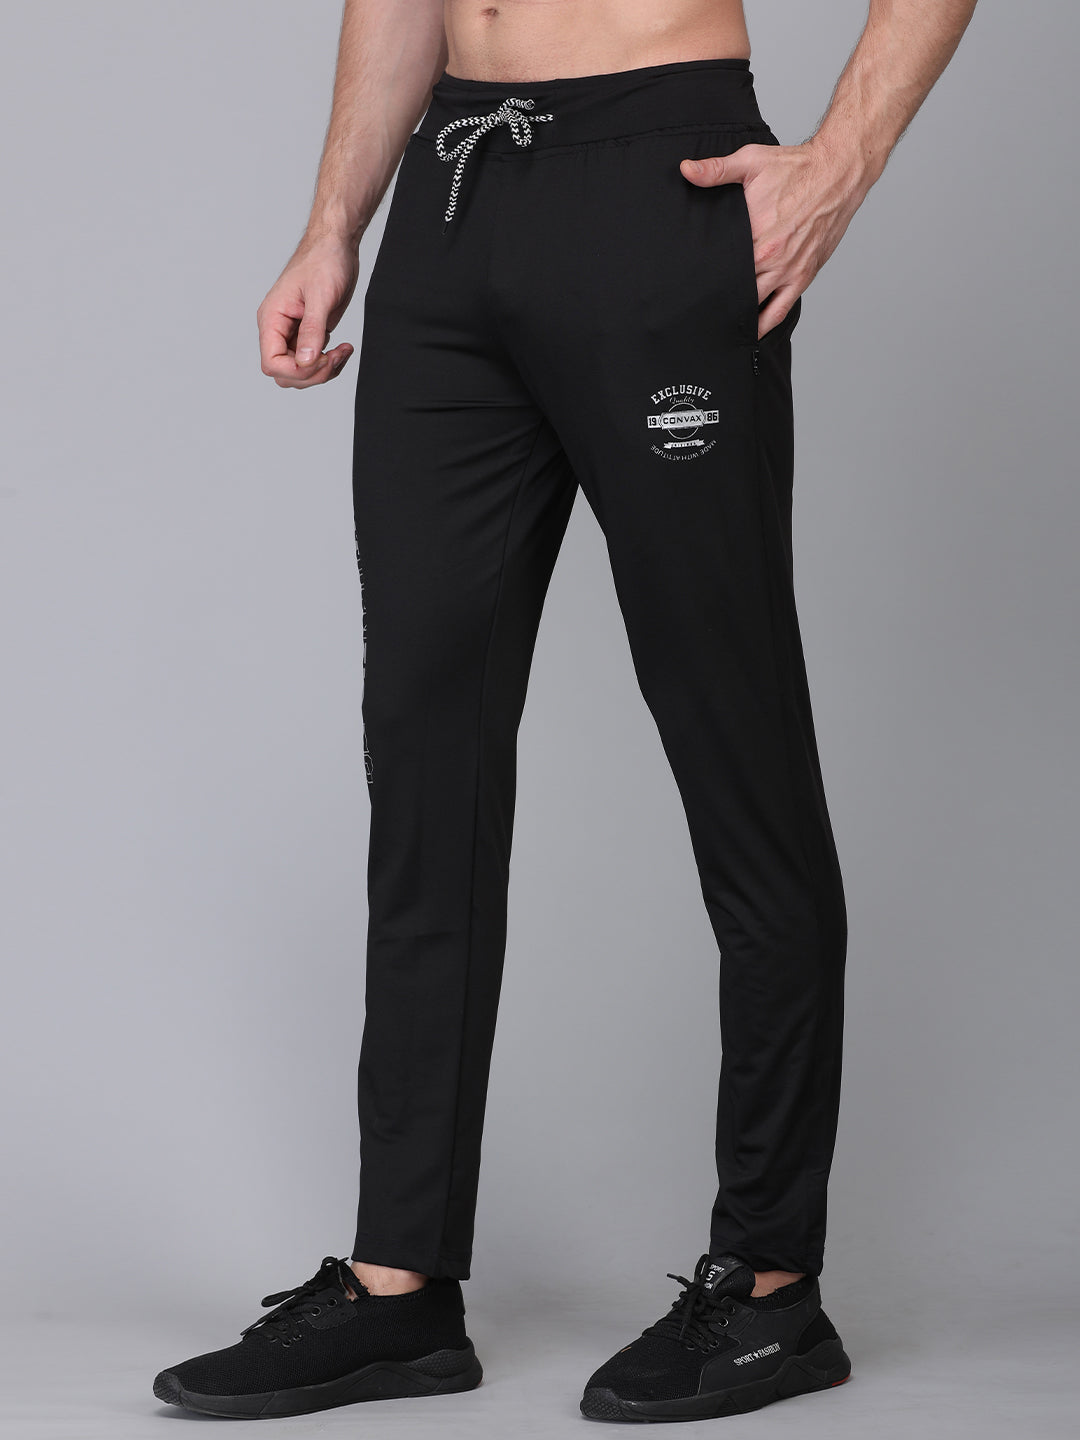 White Moon Men's Dry fit Track pants (Black) whitemoon.in